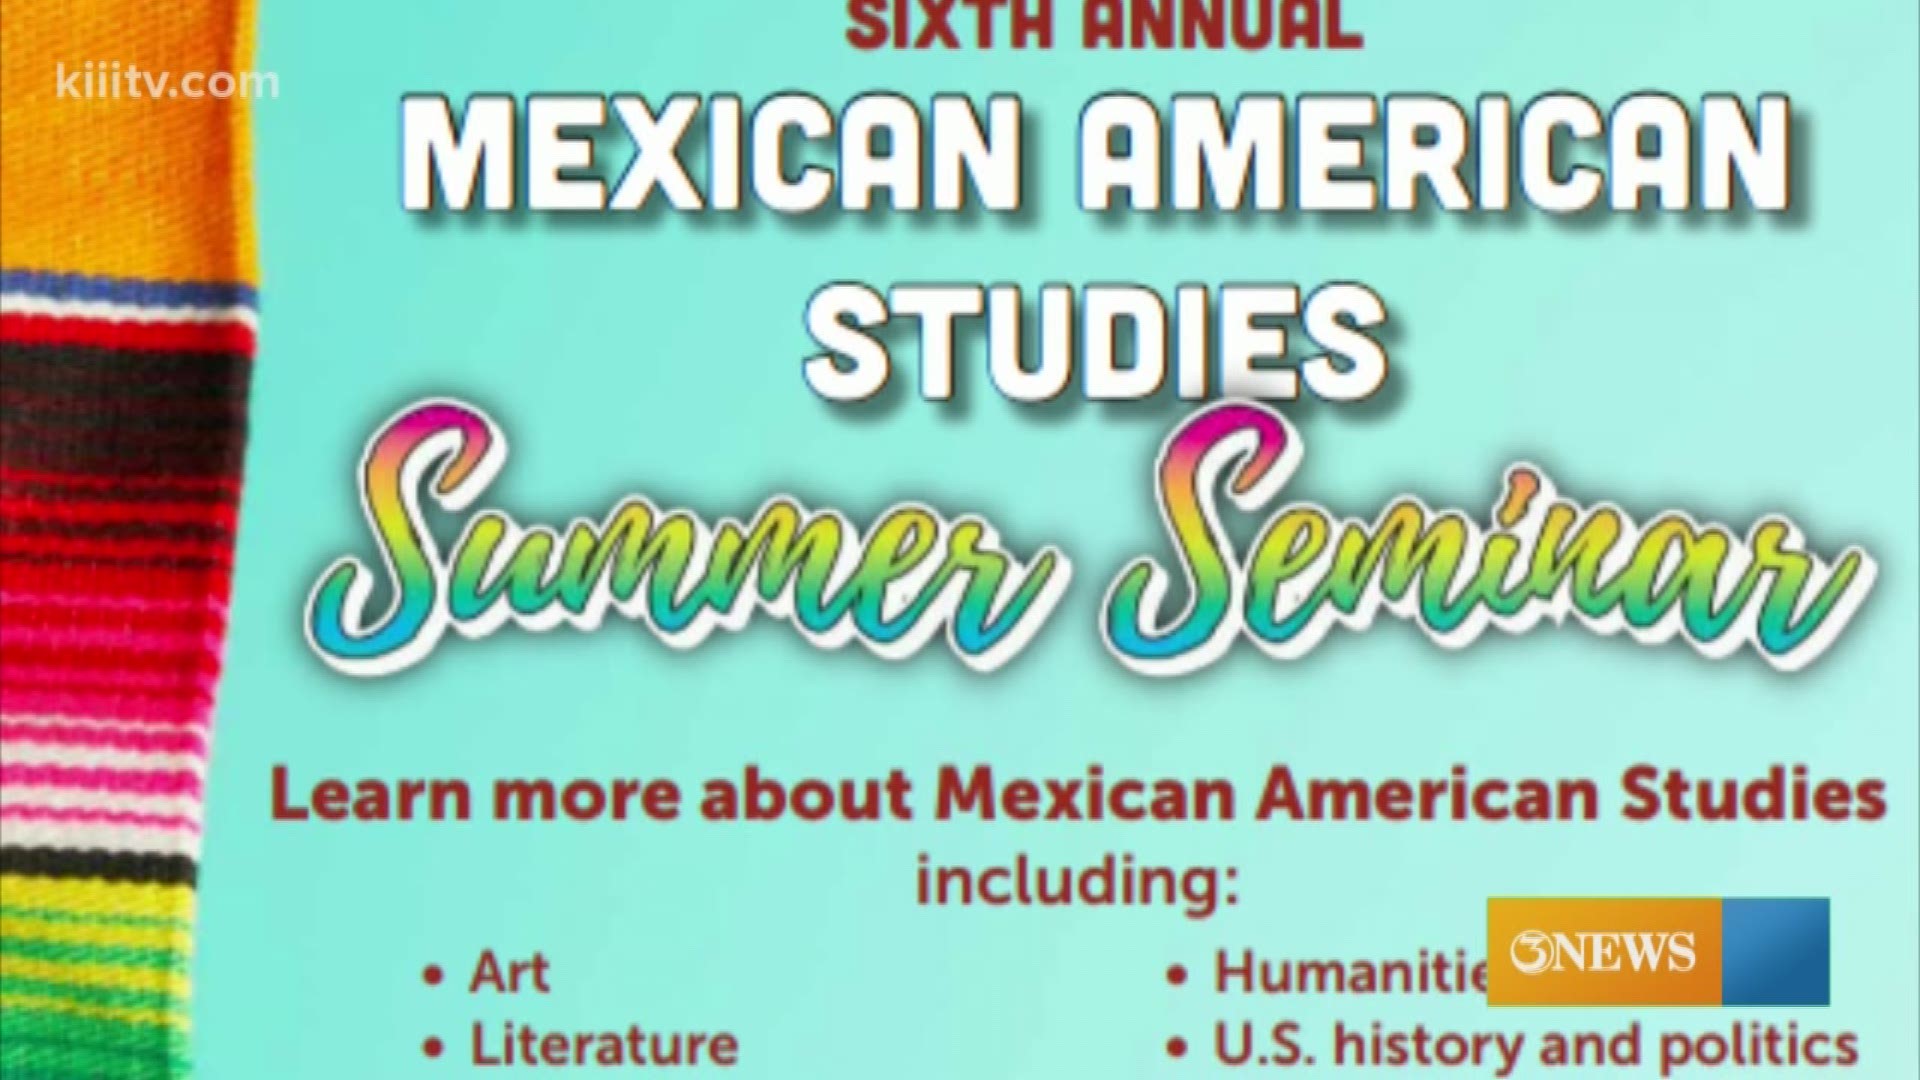 Attending the seminar will be like an immersion course to provide participants a look at Del Mar College's Mexican-American Studies associates degree program.